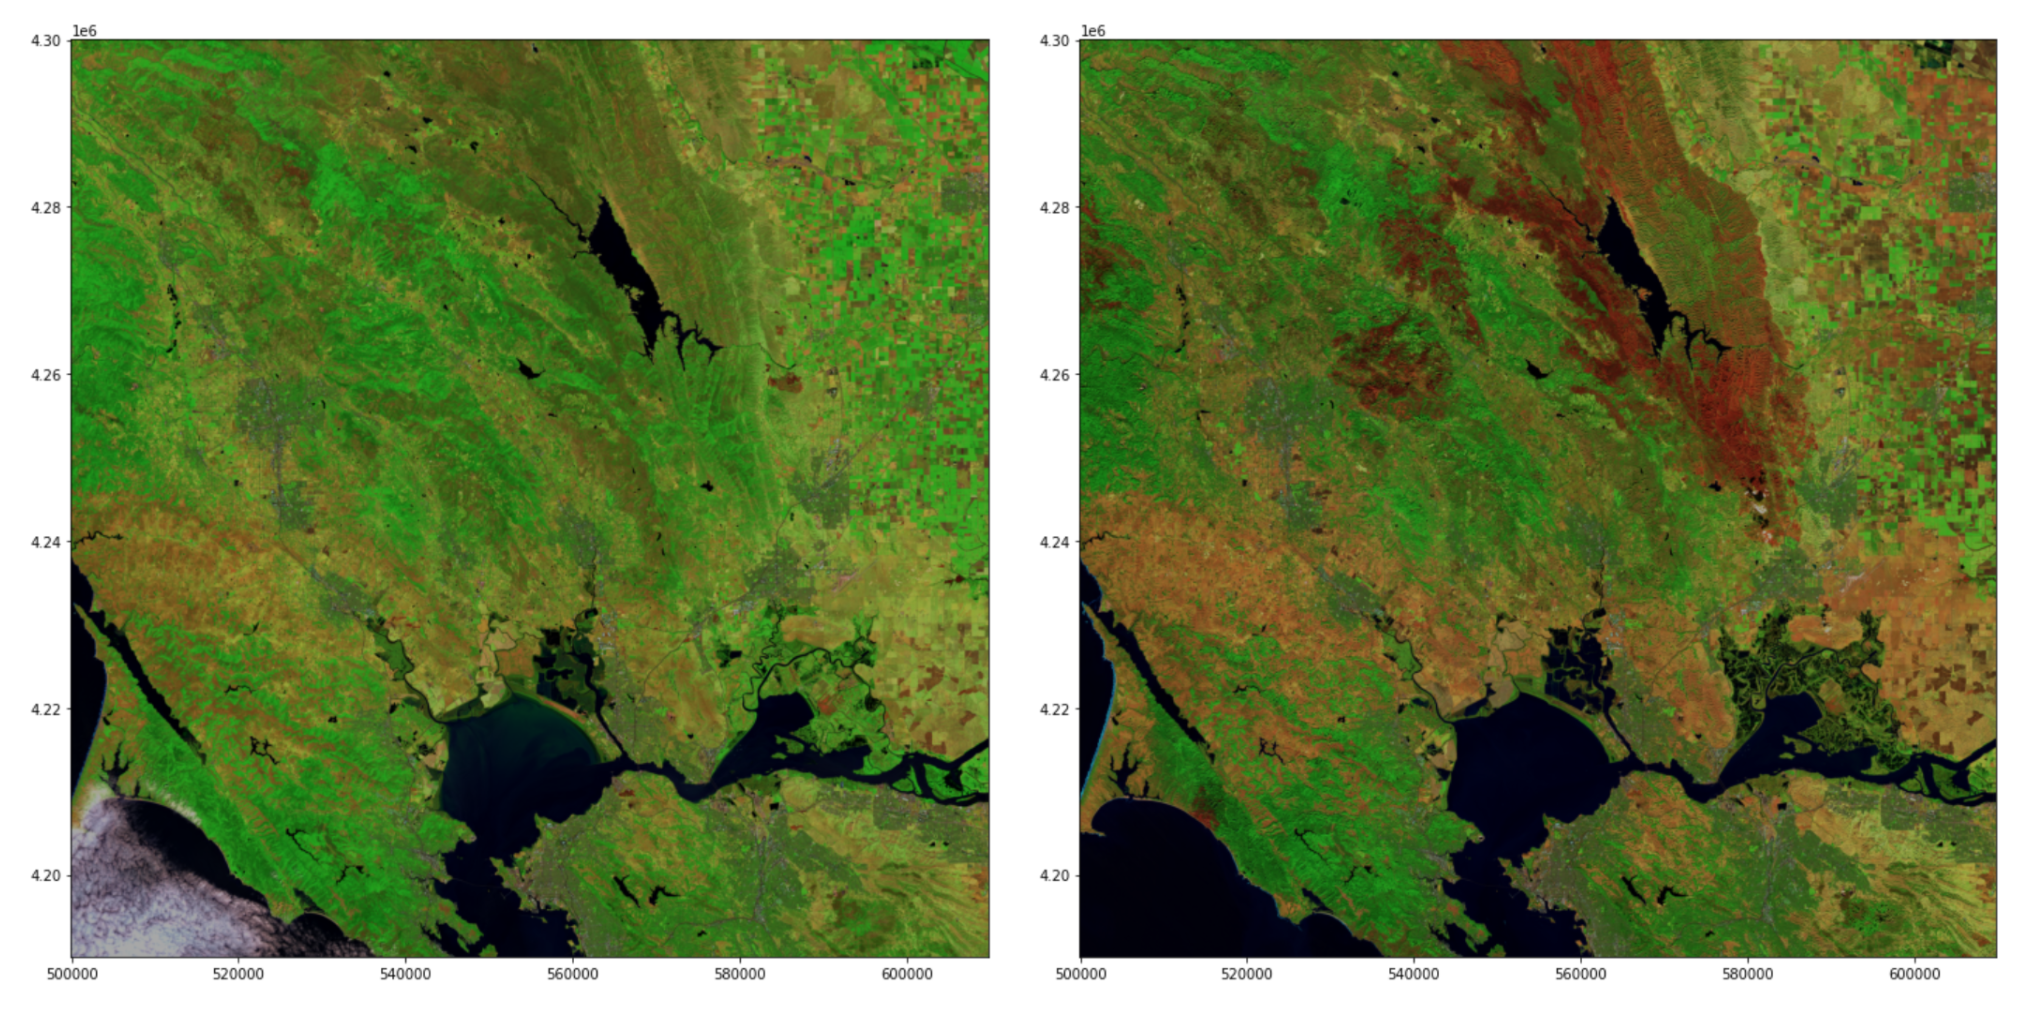 Figure 6. False colour composites from Sentinel-2 Level 2A data showing pre-fire conditions on 7 August 2020 (left) and post-fire conditions on 25 November 2020 (right) in California, USA.